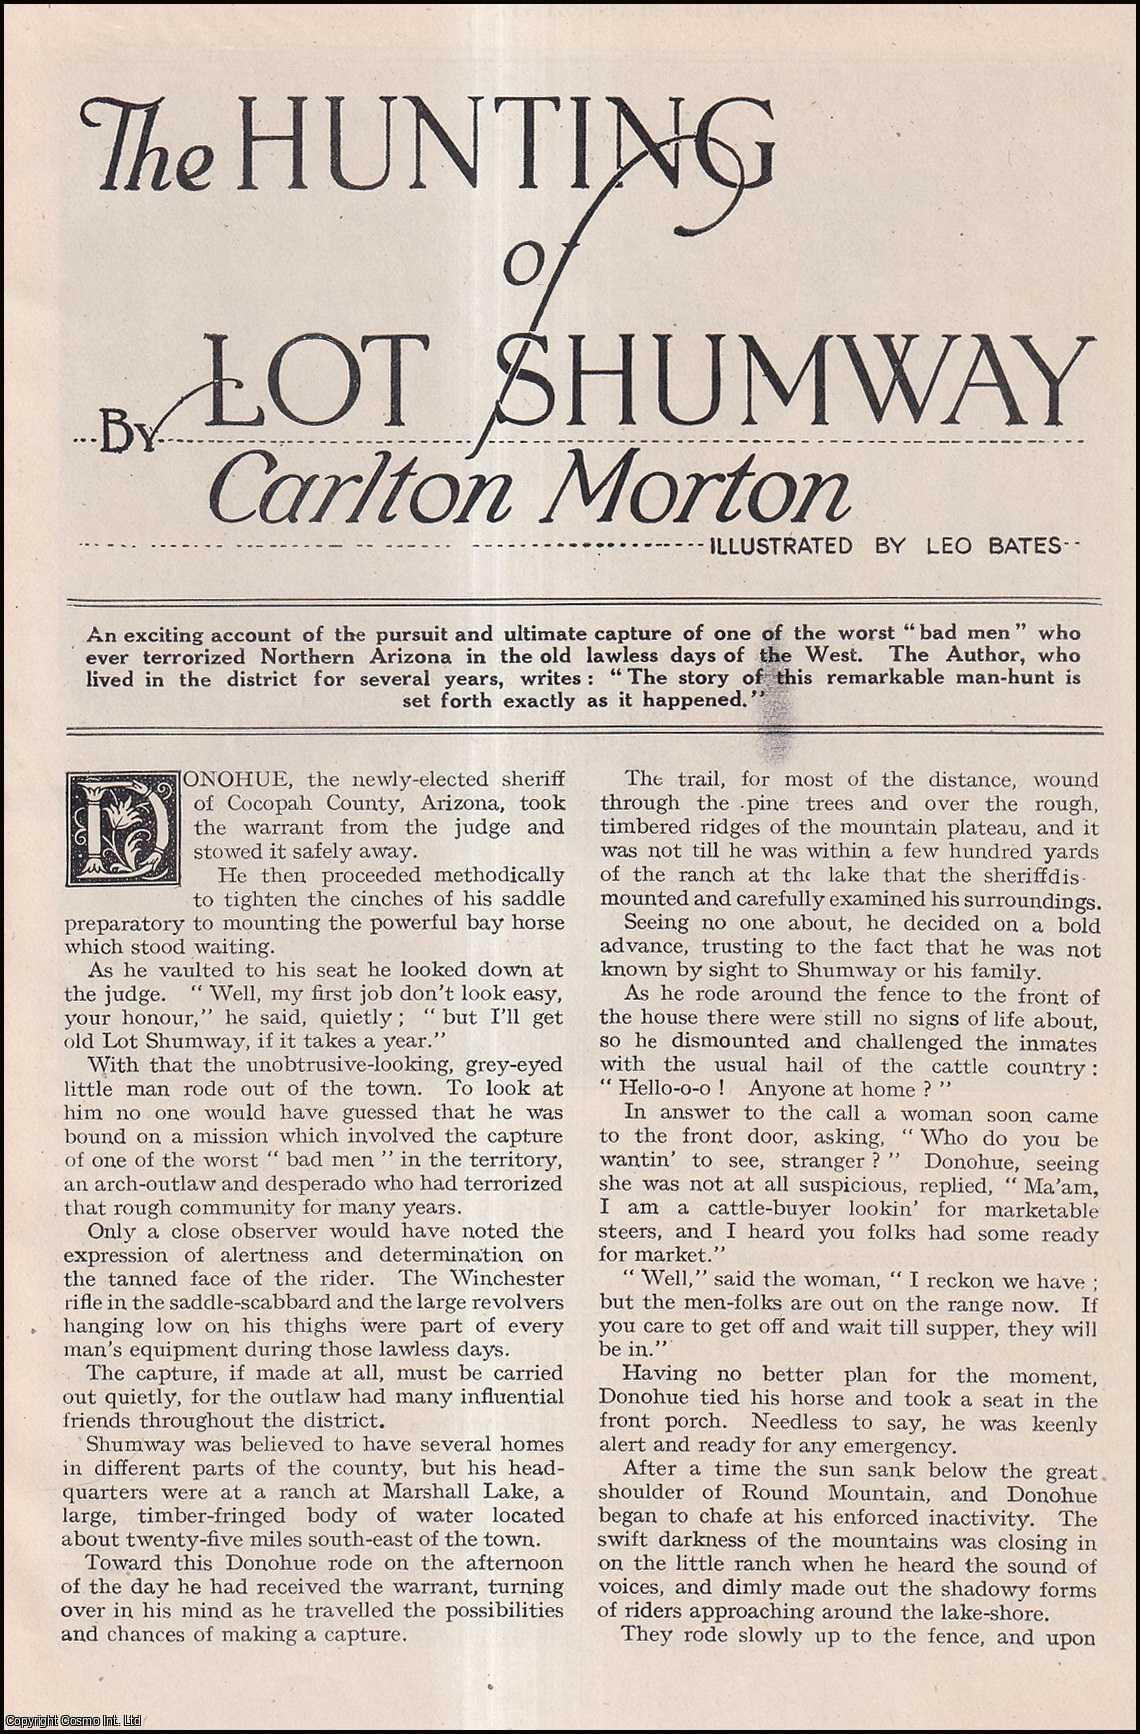 Carlton Morton, illustrated by Leo Bates - The Hunting of Lot Shumway. The pursuit and capture of one of the worst 'bad-men' who terrorised Northern Arizona.An uncommon original article from the Wide World Magazine, 1919.